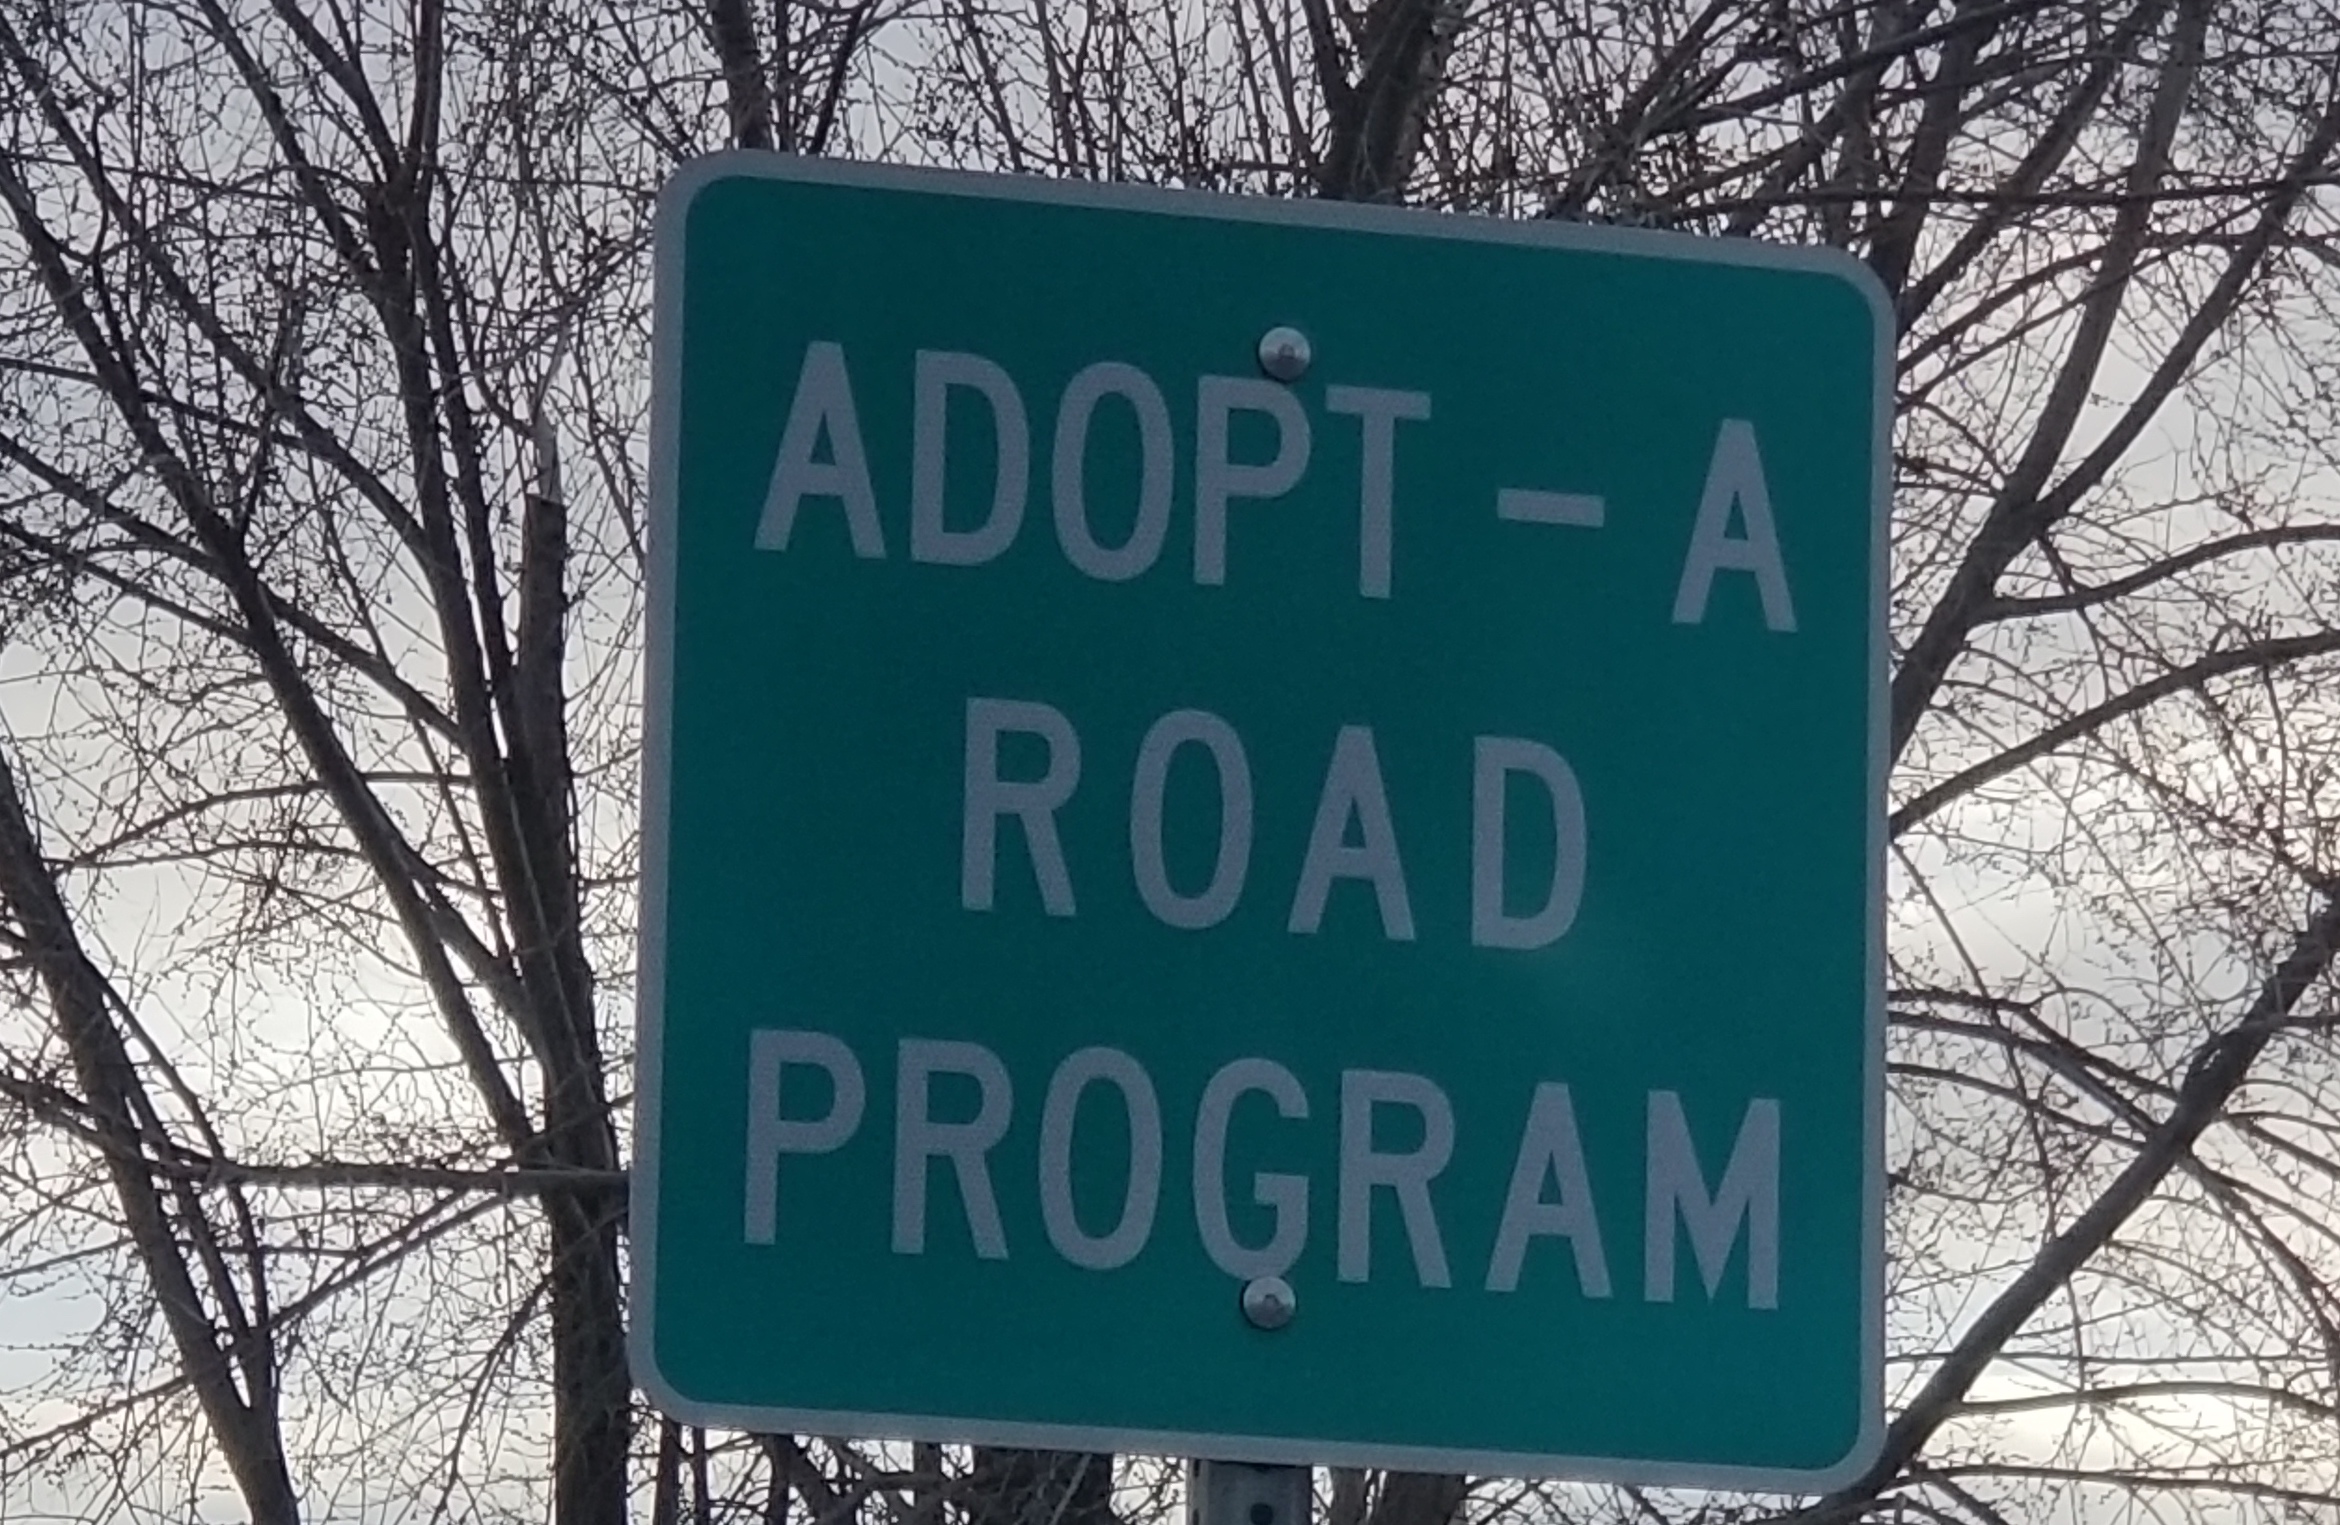 South Fulton ‘Adopt-A-Road’ Program to Target Litter, Promote Beautification